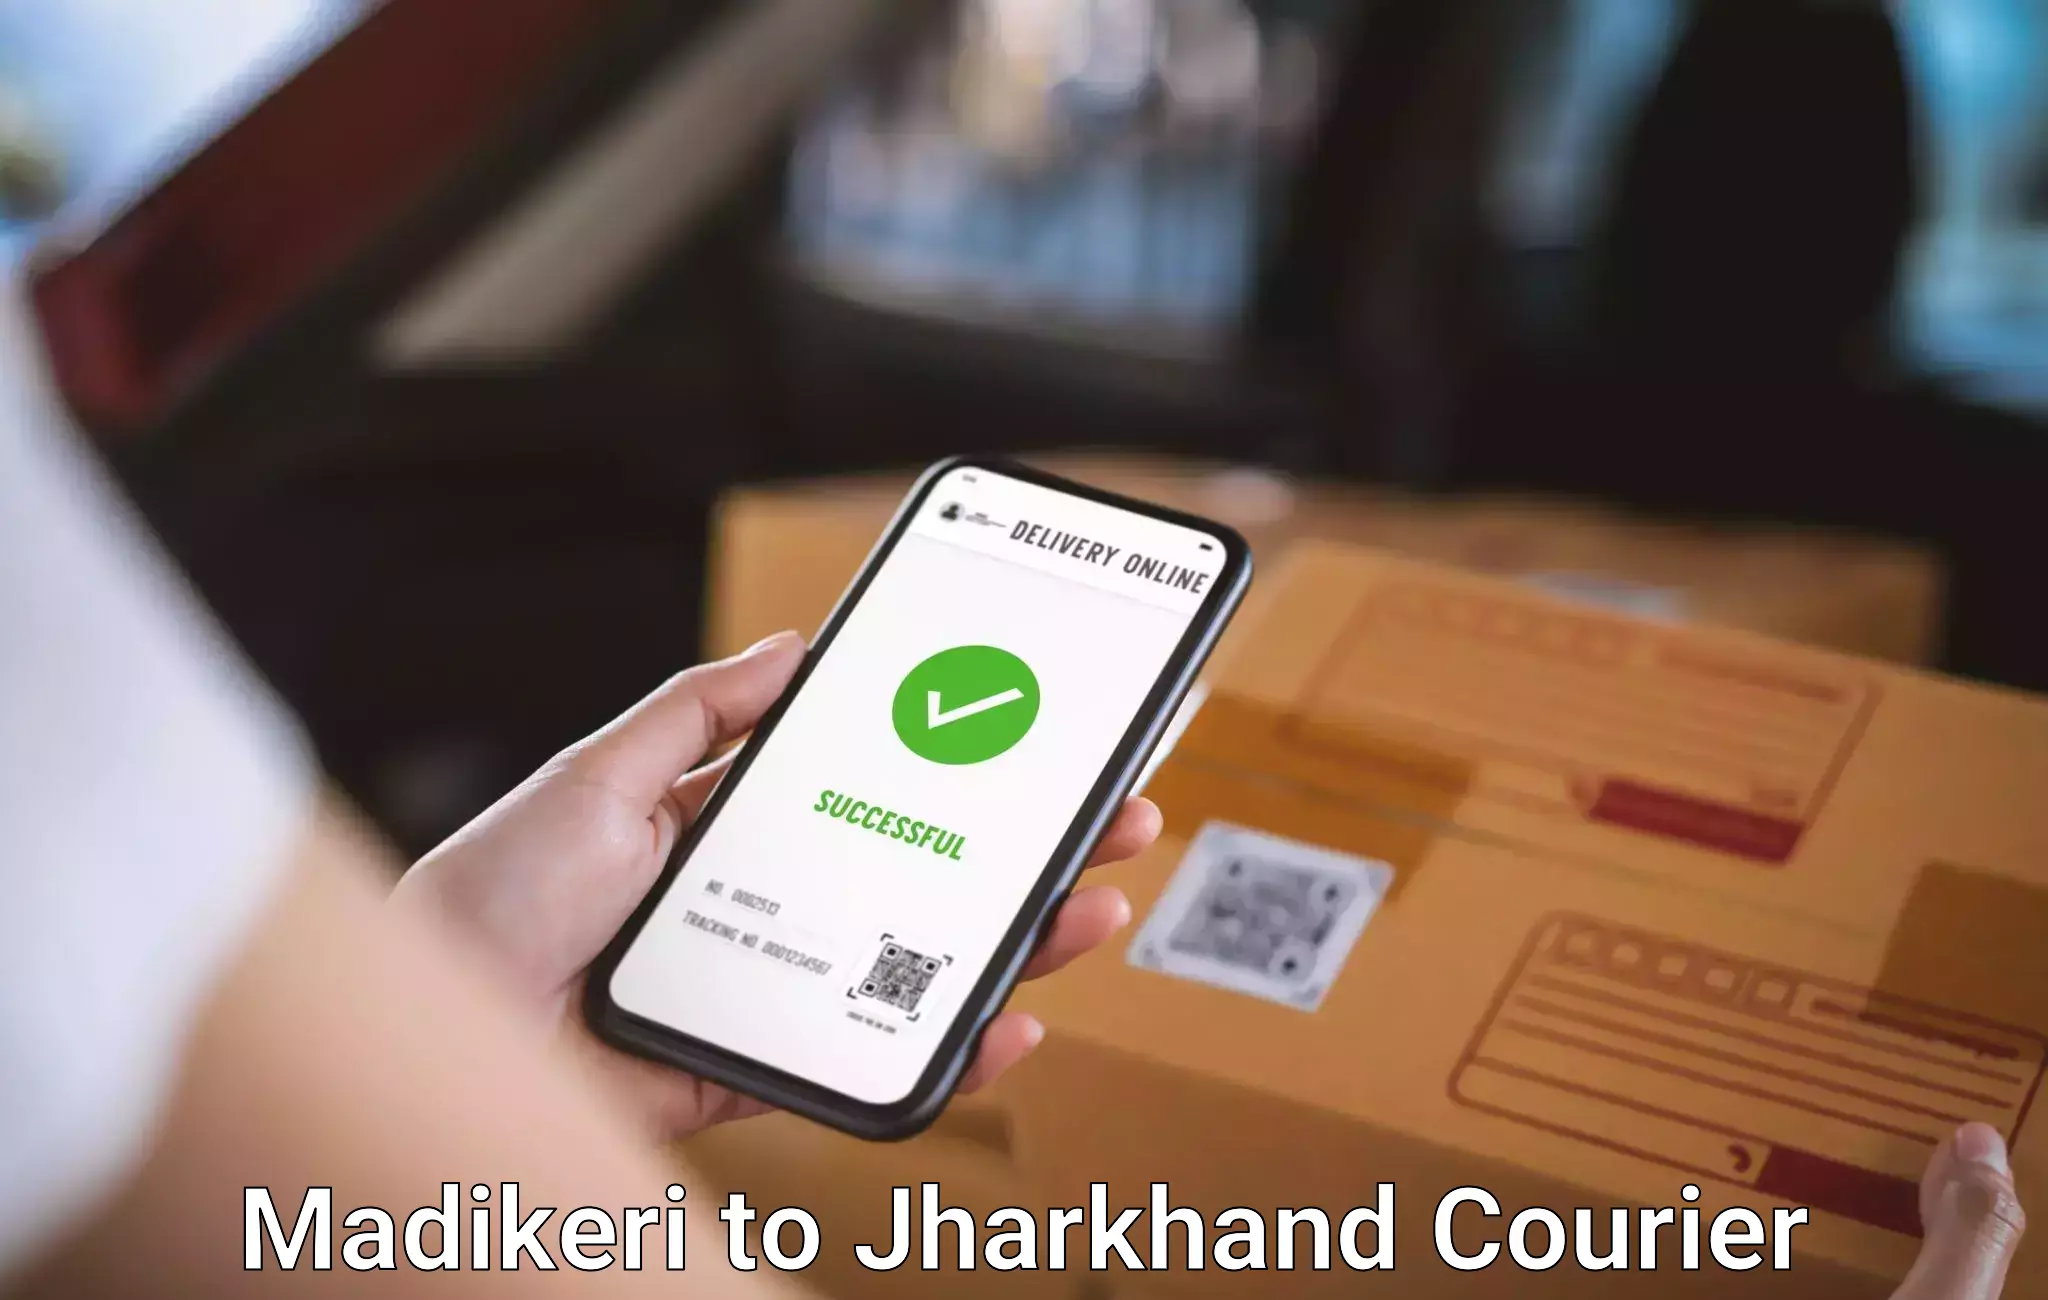 Luggage delivery app Madikeri to Jharkhand